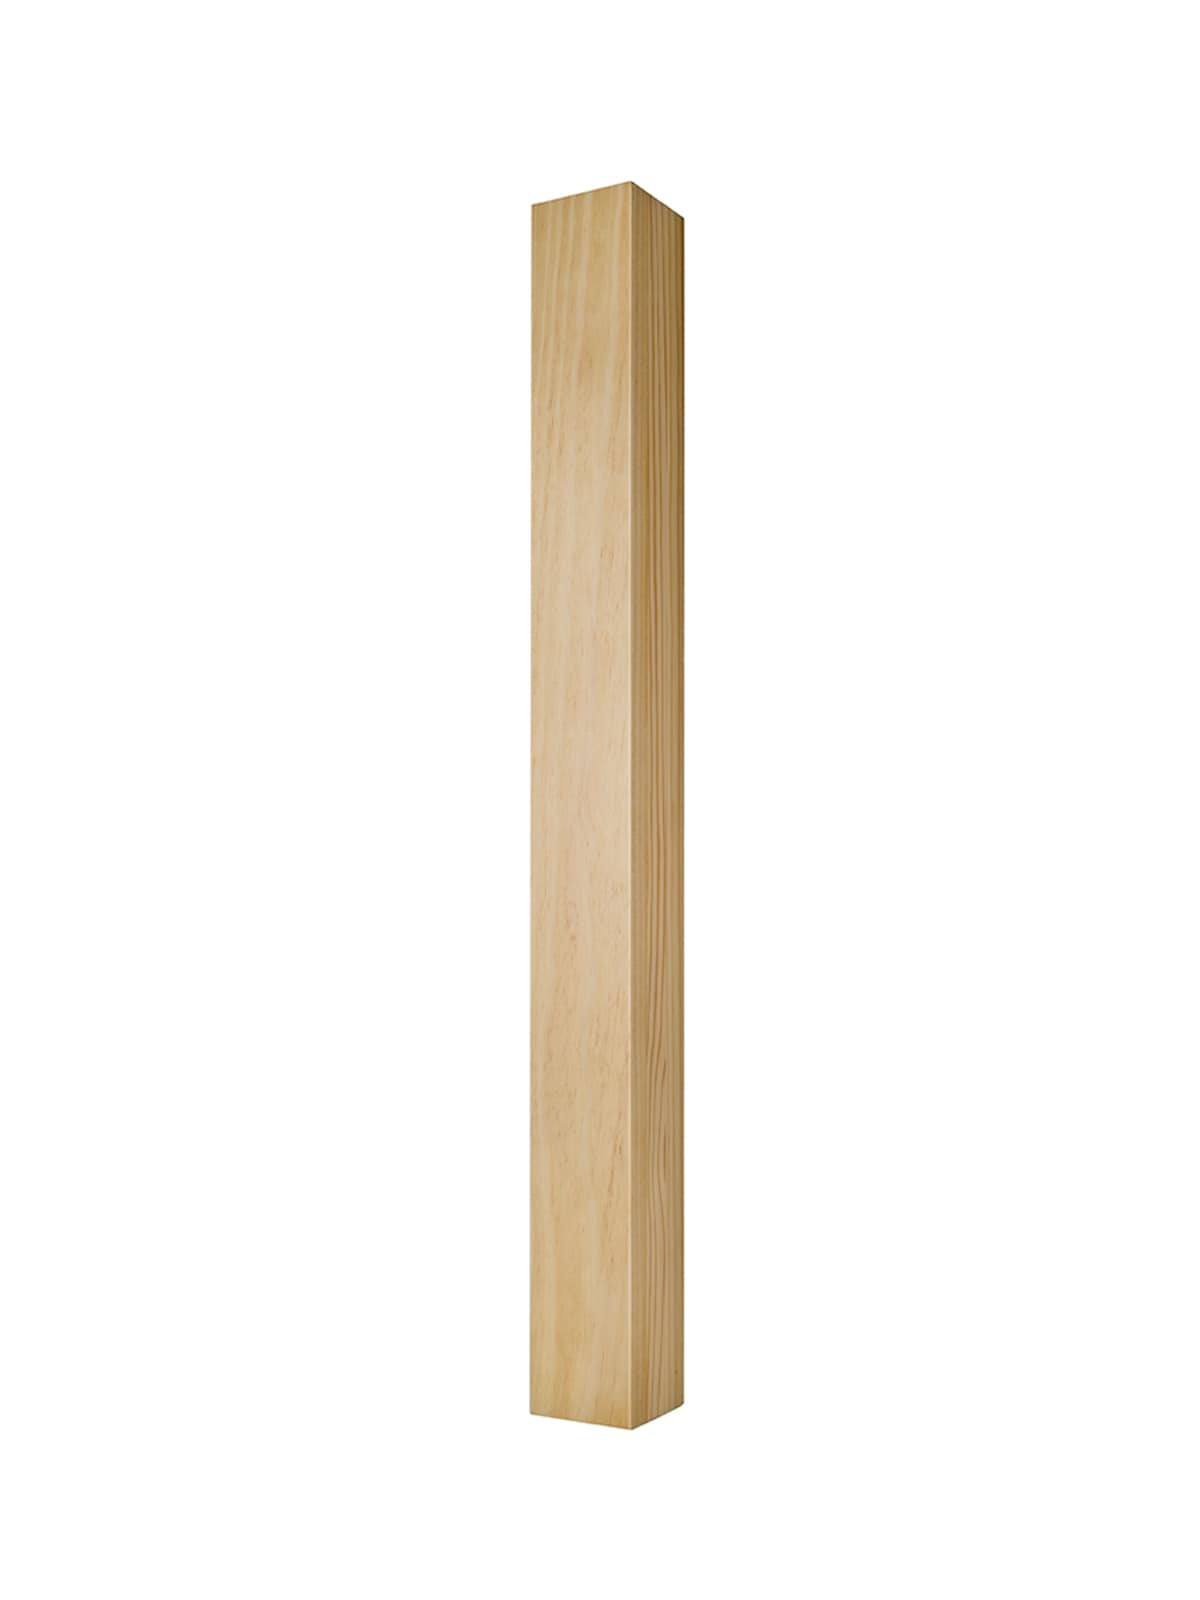 Square Pine Table Leg In The Legs